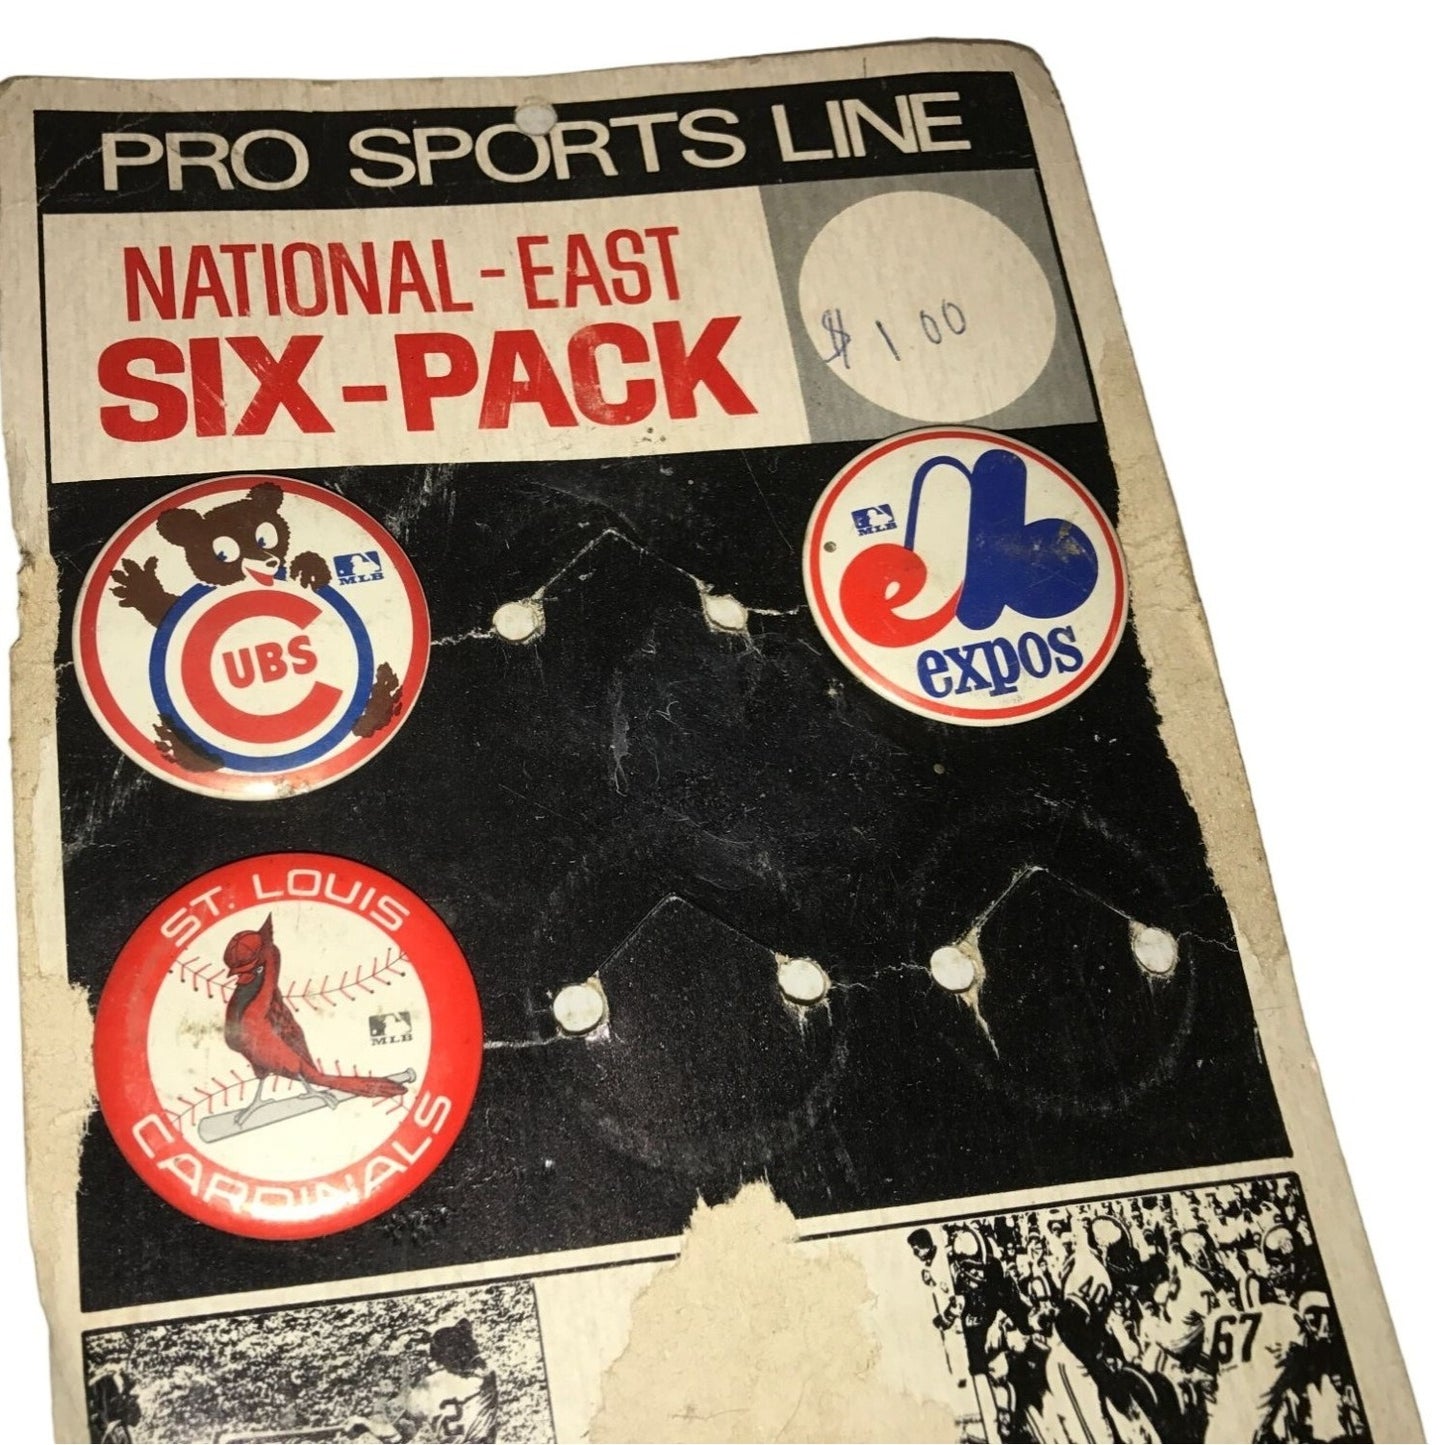 Pro Sports Line - National East six pack- Set of 3 Vintage Buttons- Expos - Cubs - Cardinals